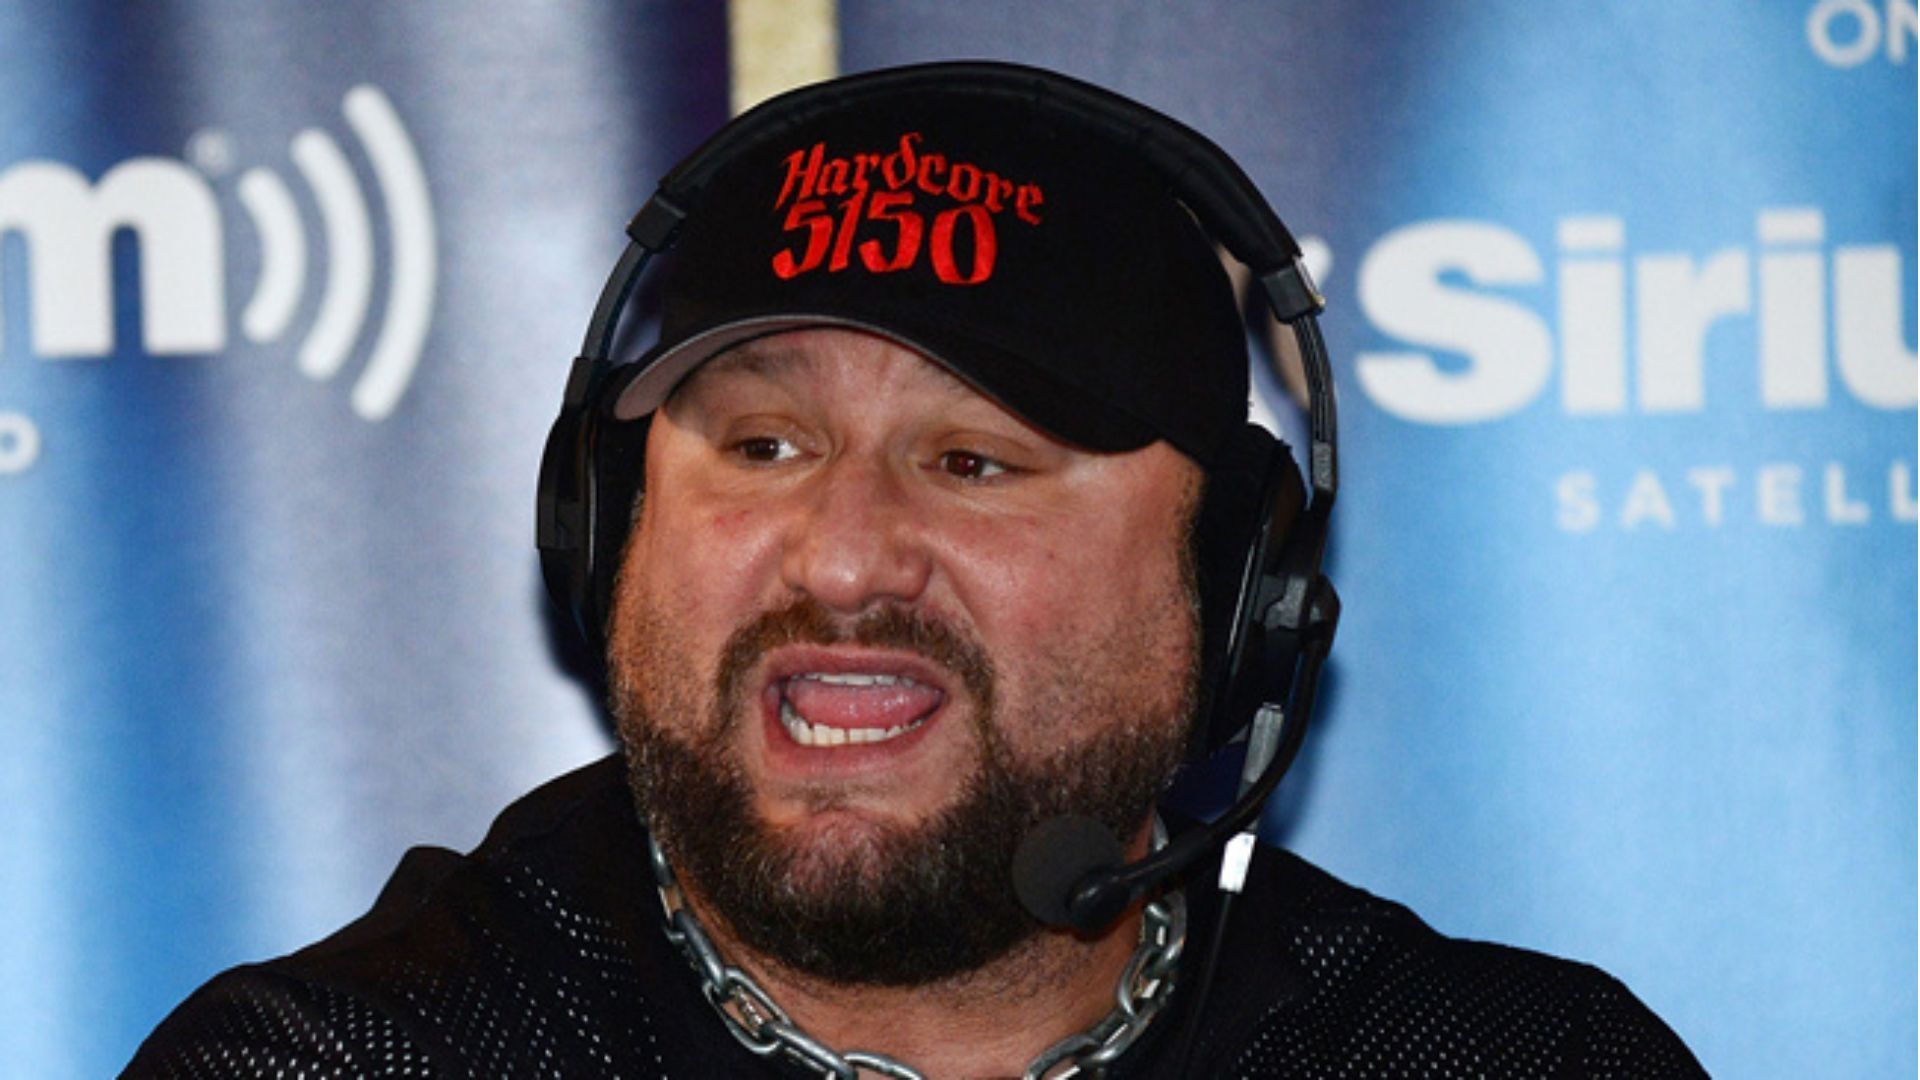 Bully Ray hosts the Busted Open Radio show and is signed to Impact Wrestling